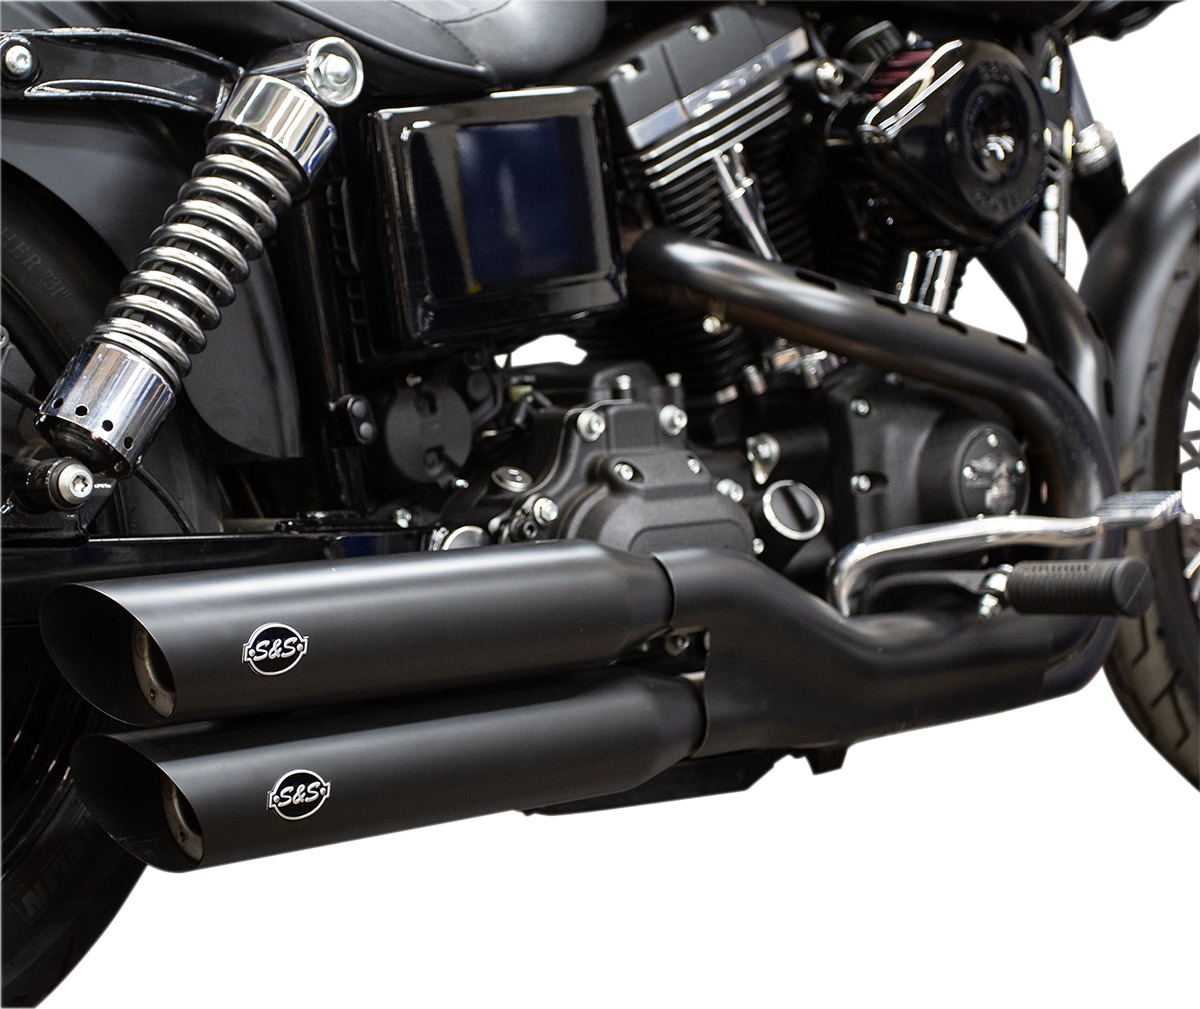 Dual Black Slip On Exhaust Slash-Cut - For 08-17 Harley Dyna FXDF FXDLS FXDWG - Click Image to Close